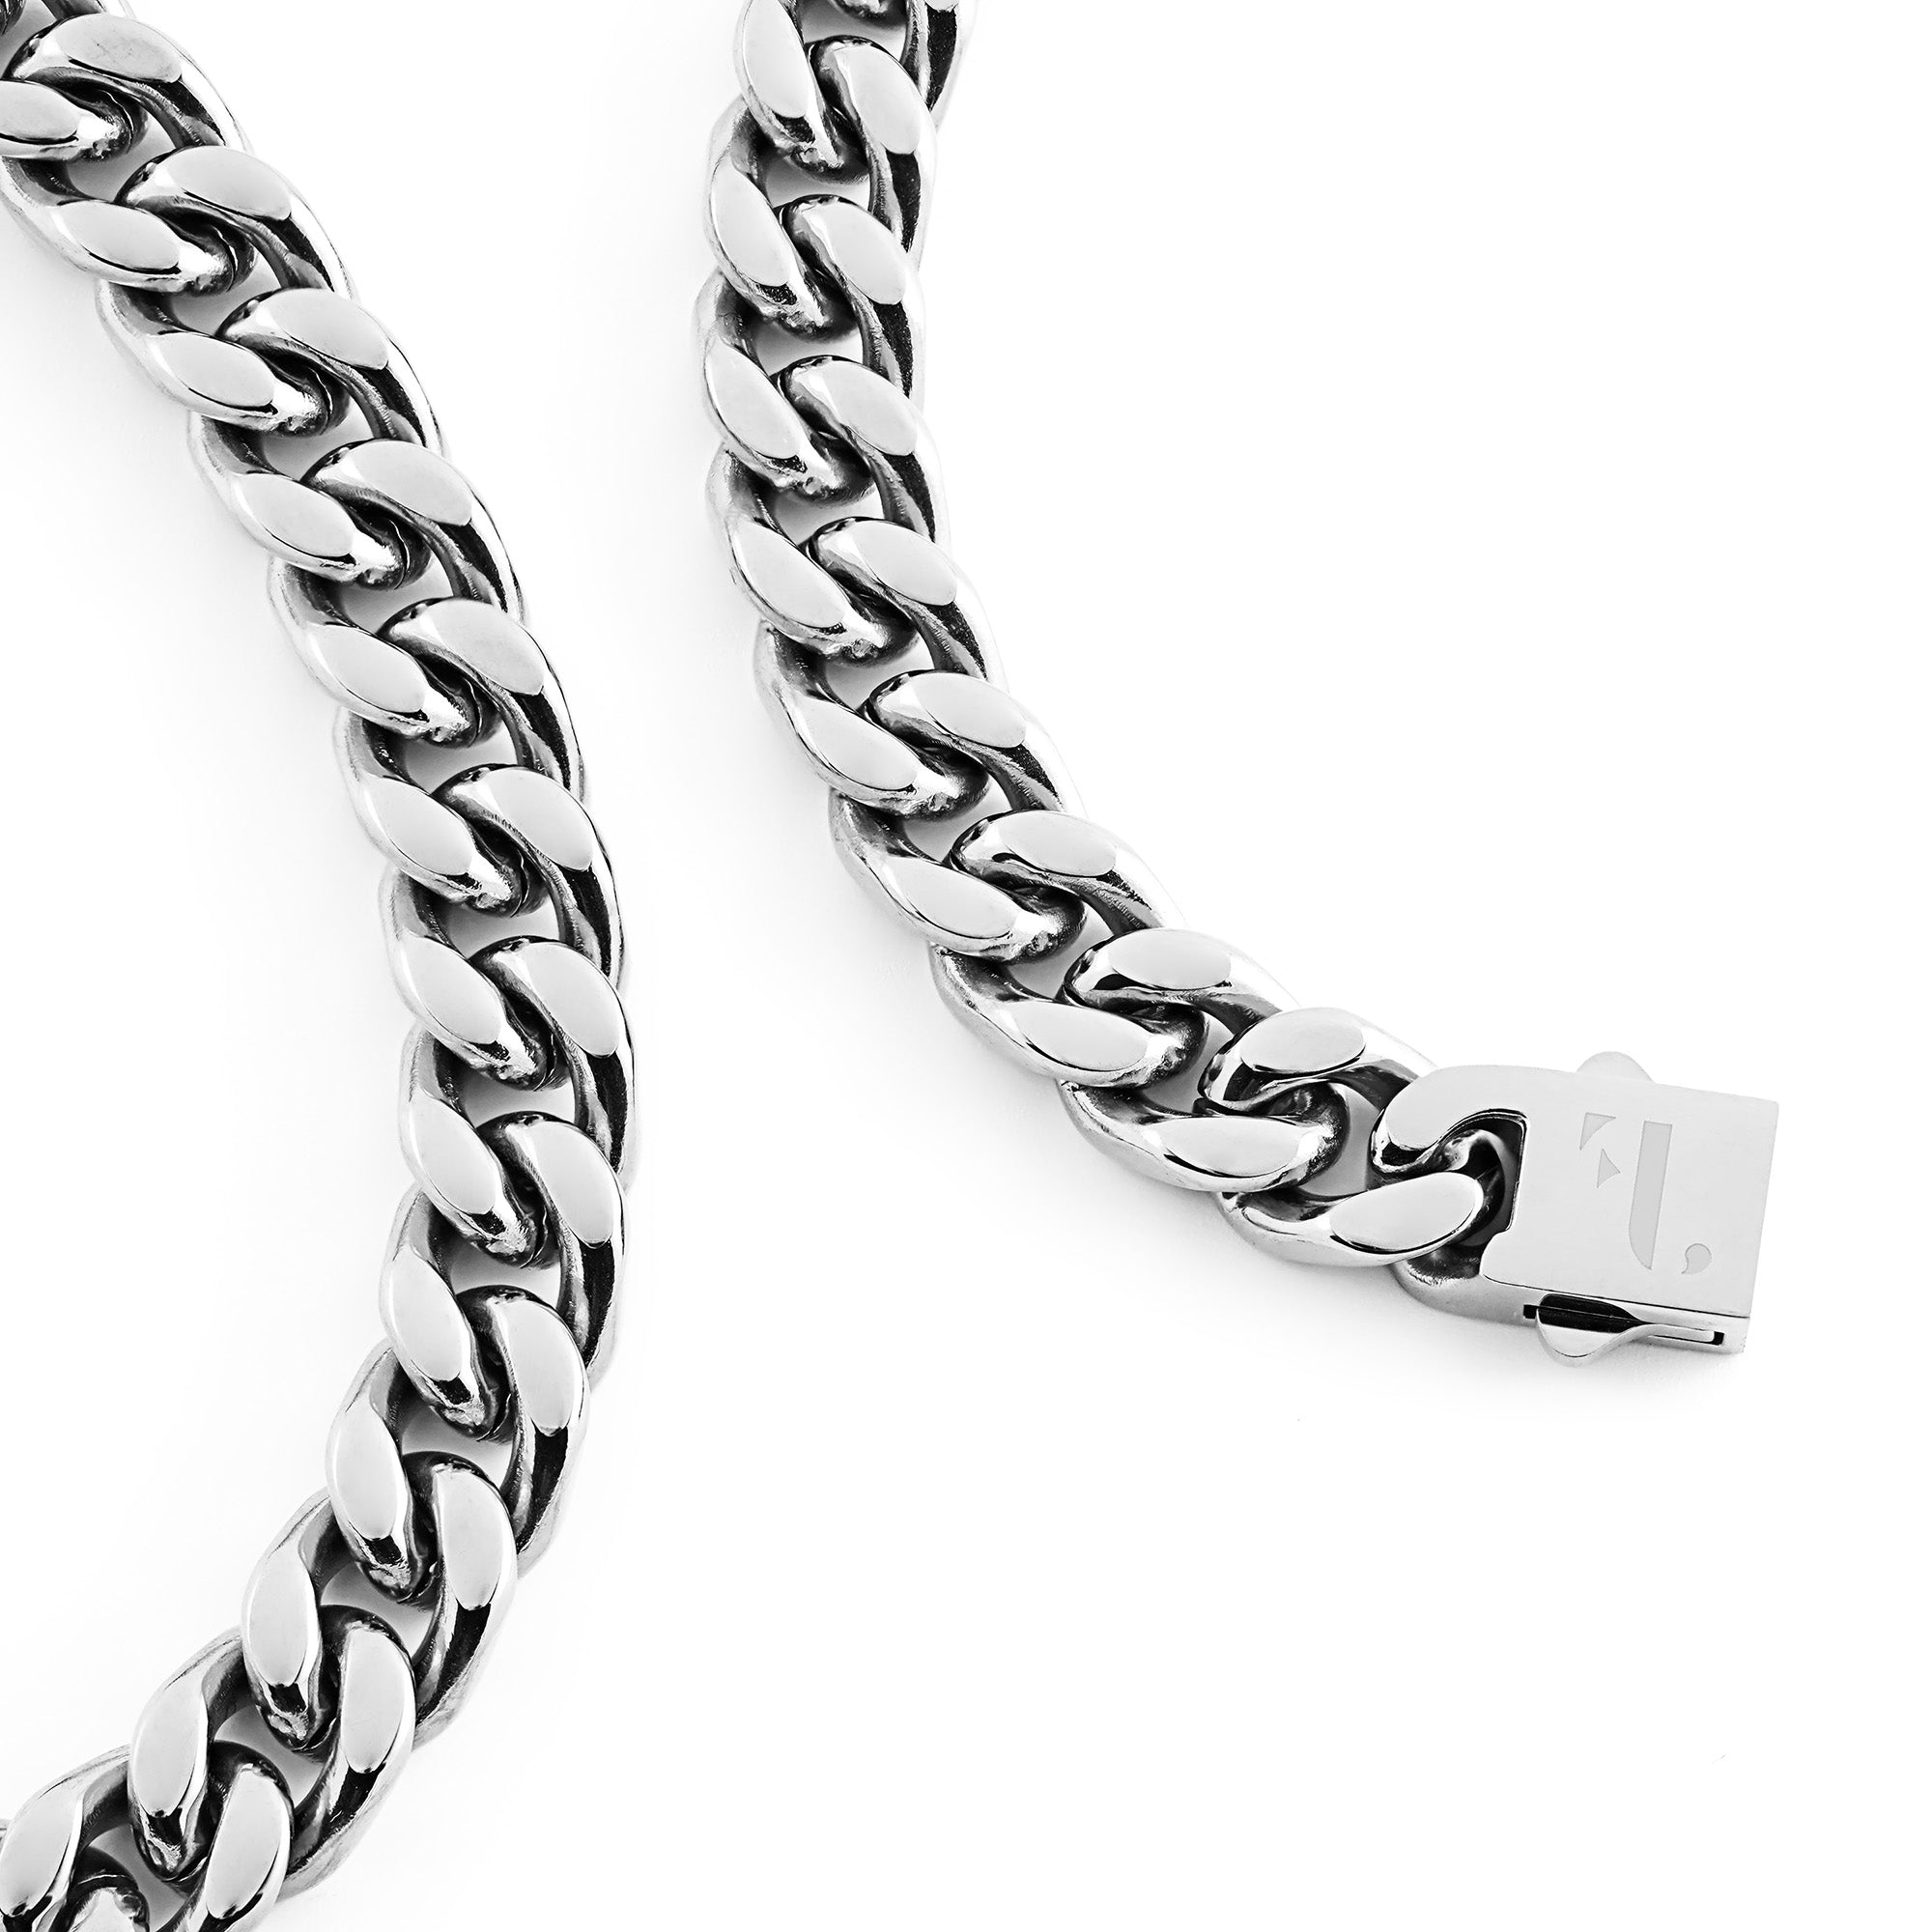 Cass women's bracelet by Five Jwlry, designed with a 10mm tightly woven Cuban link chain in a silver hue, crafted from water-resistant 316L stainless steel. Available in sizes 18cm, 20cm, 22cm, and 24cm. Hypoallergenic and accompanied by a 2-year warranty.